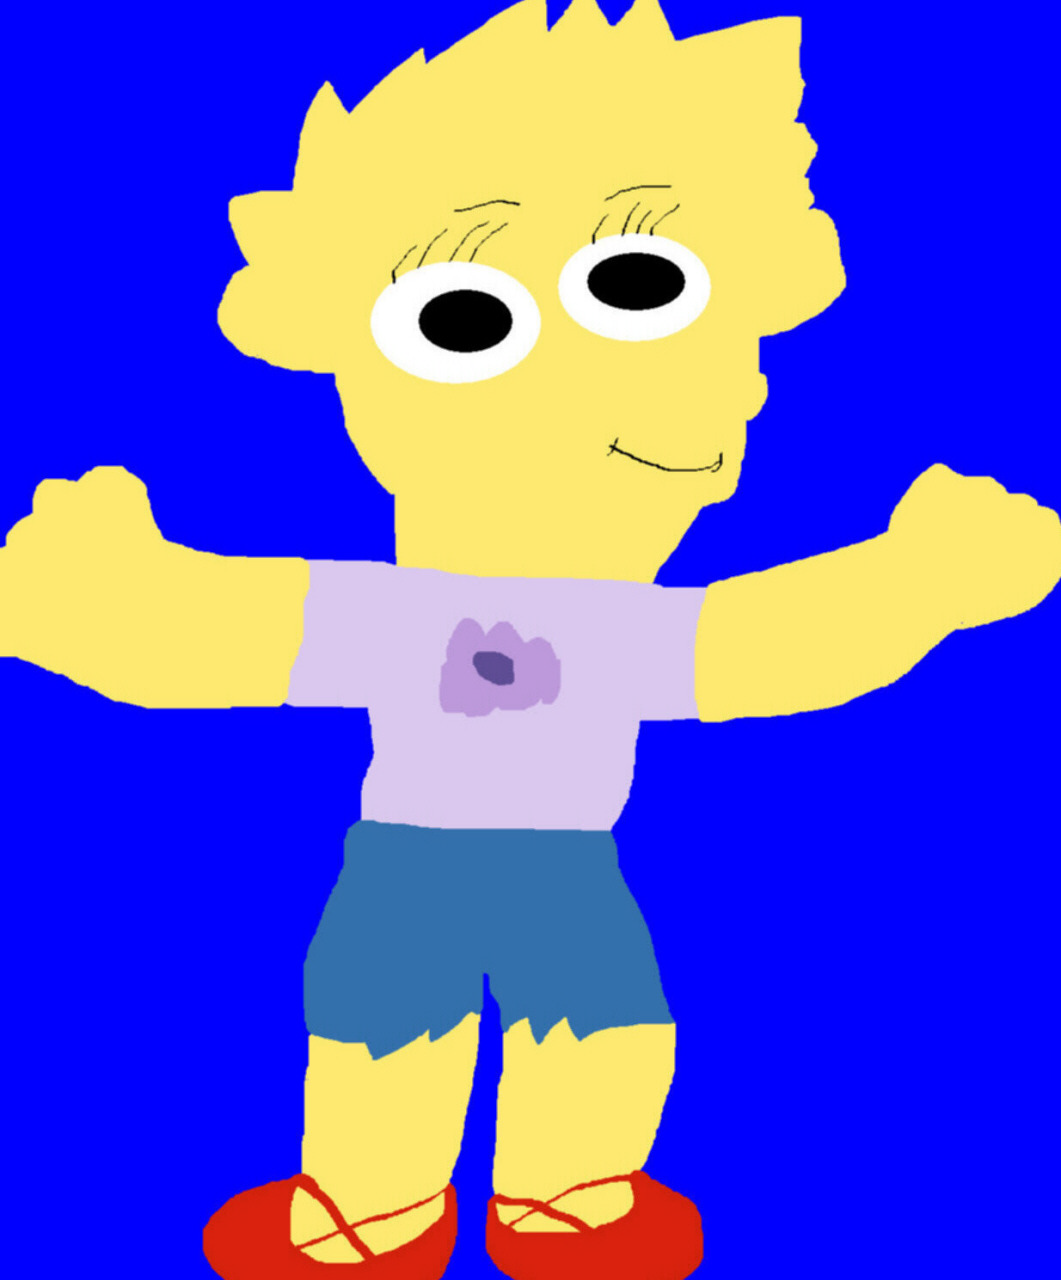 Lisa In Flower Tshirt and Jean Shorts Request MS Paint by Falconlobo